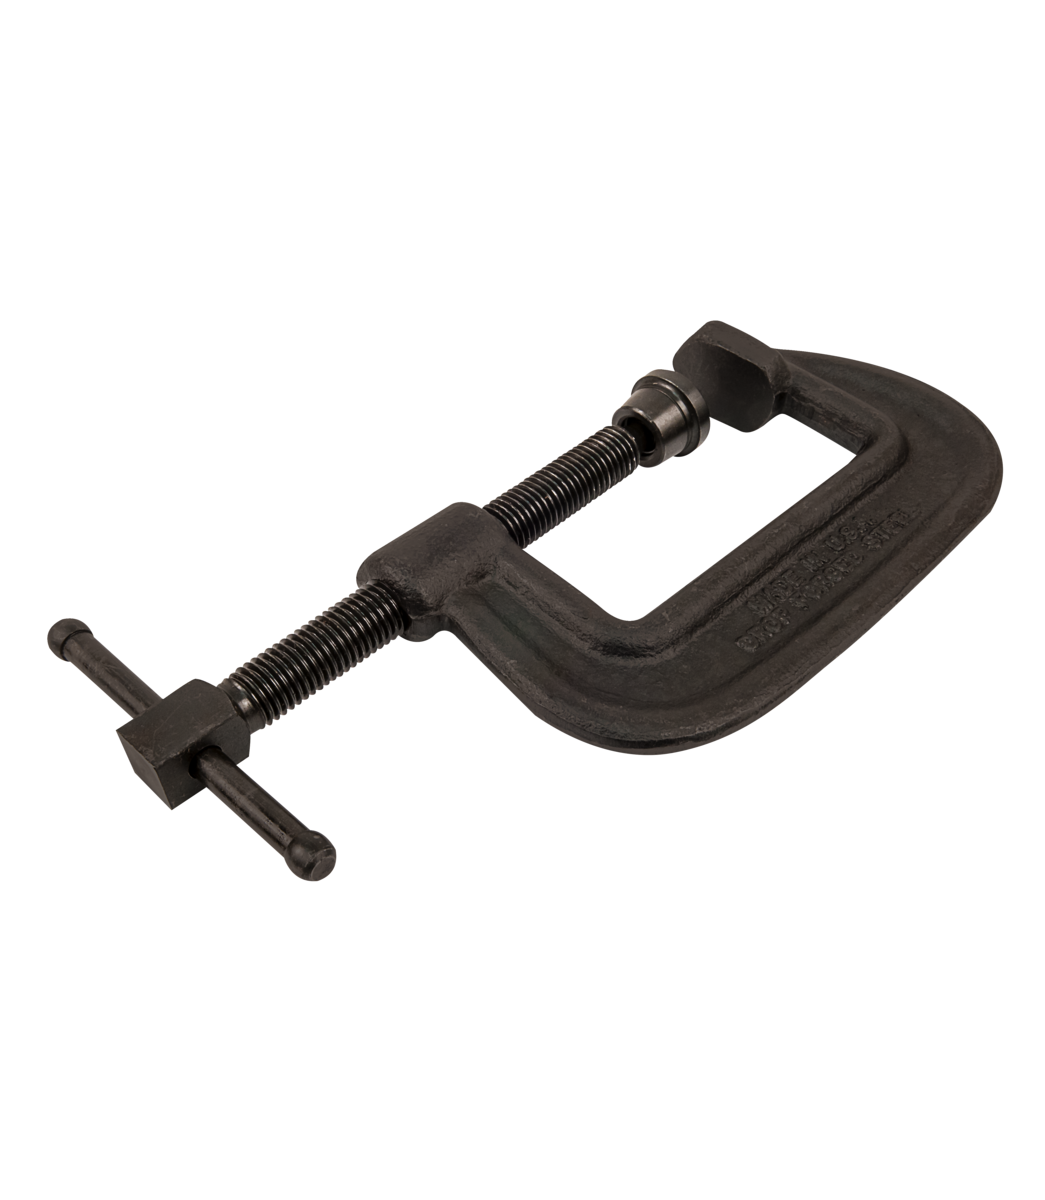 WILTON 100 Series Forged C-Clamp - Heavy-Duty 0 - 3-5/8” Opening Capacity